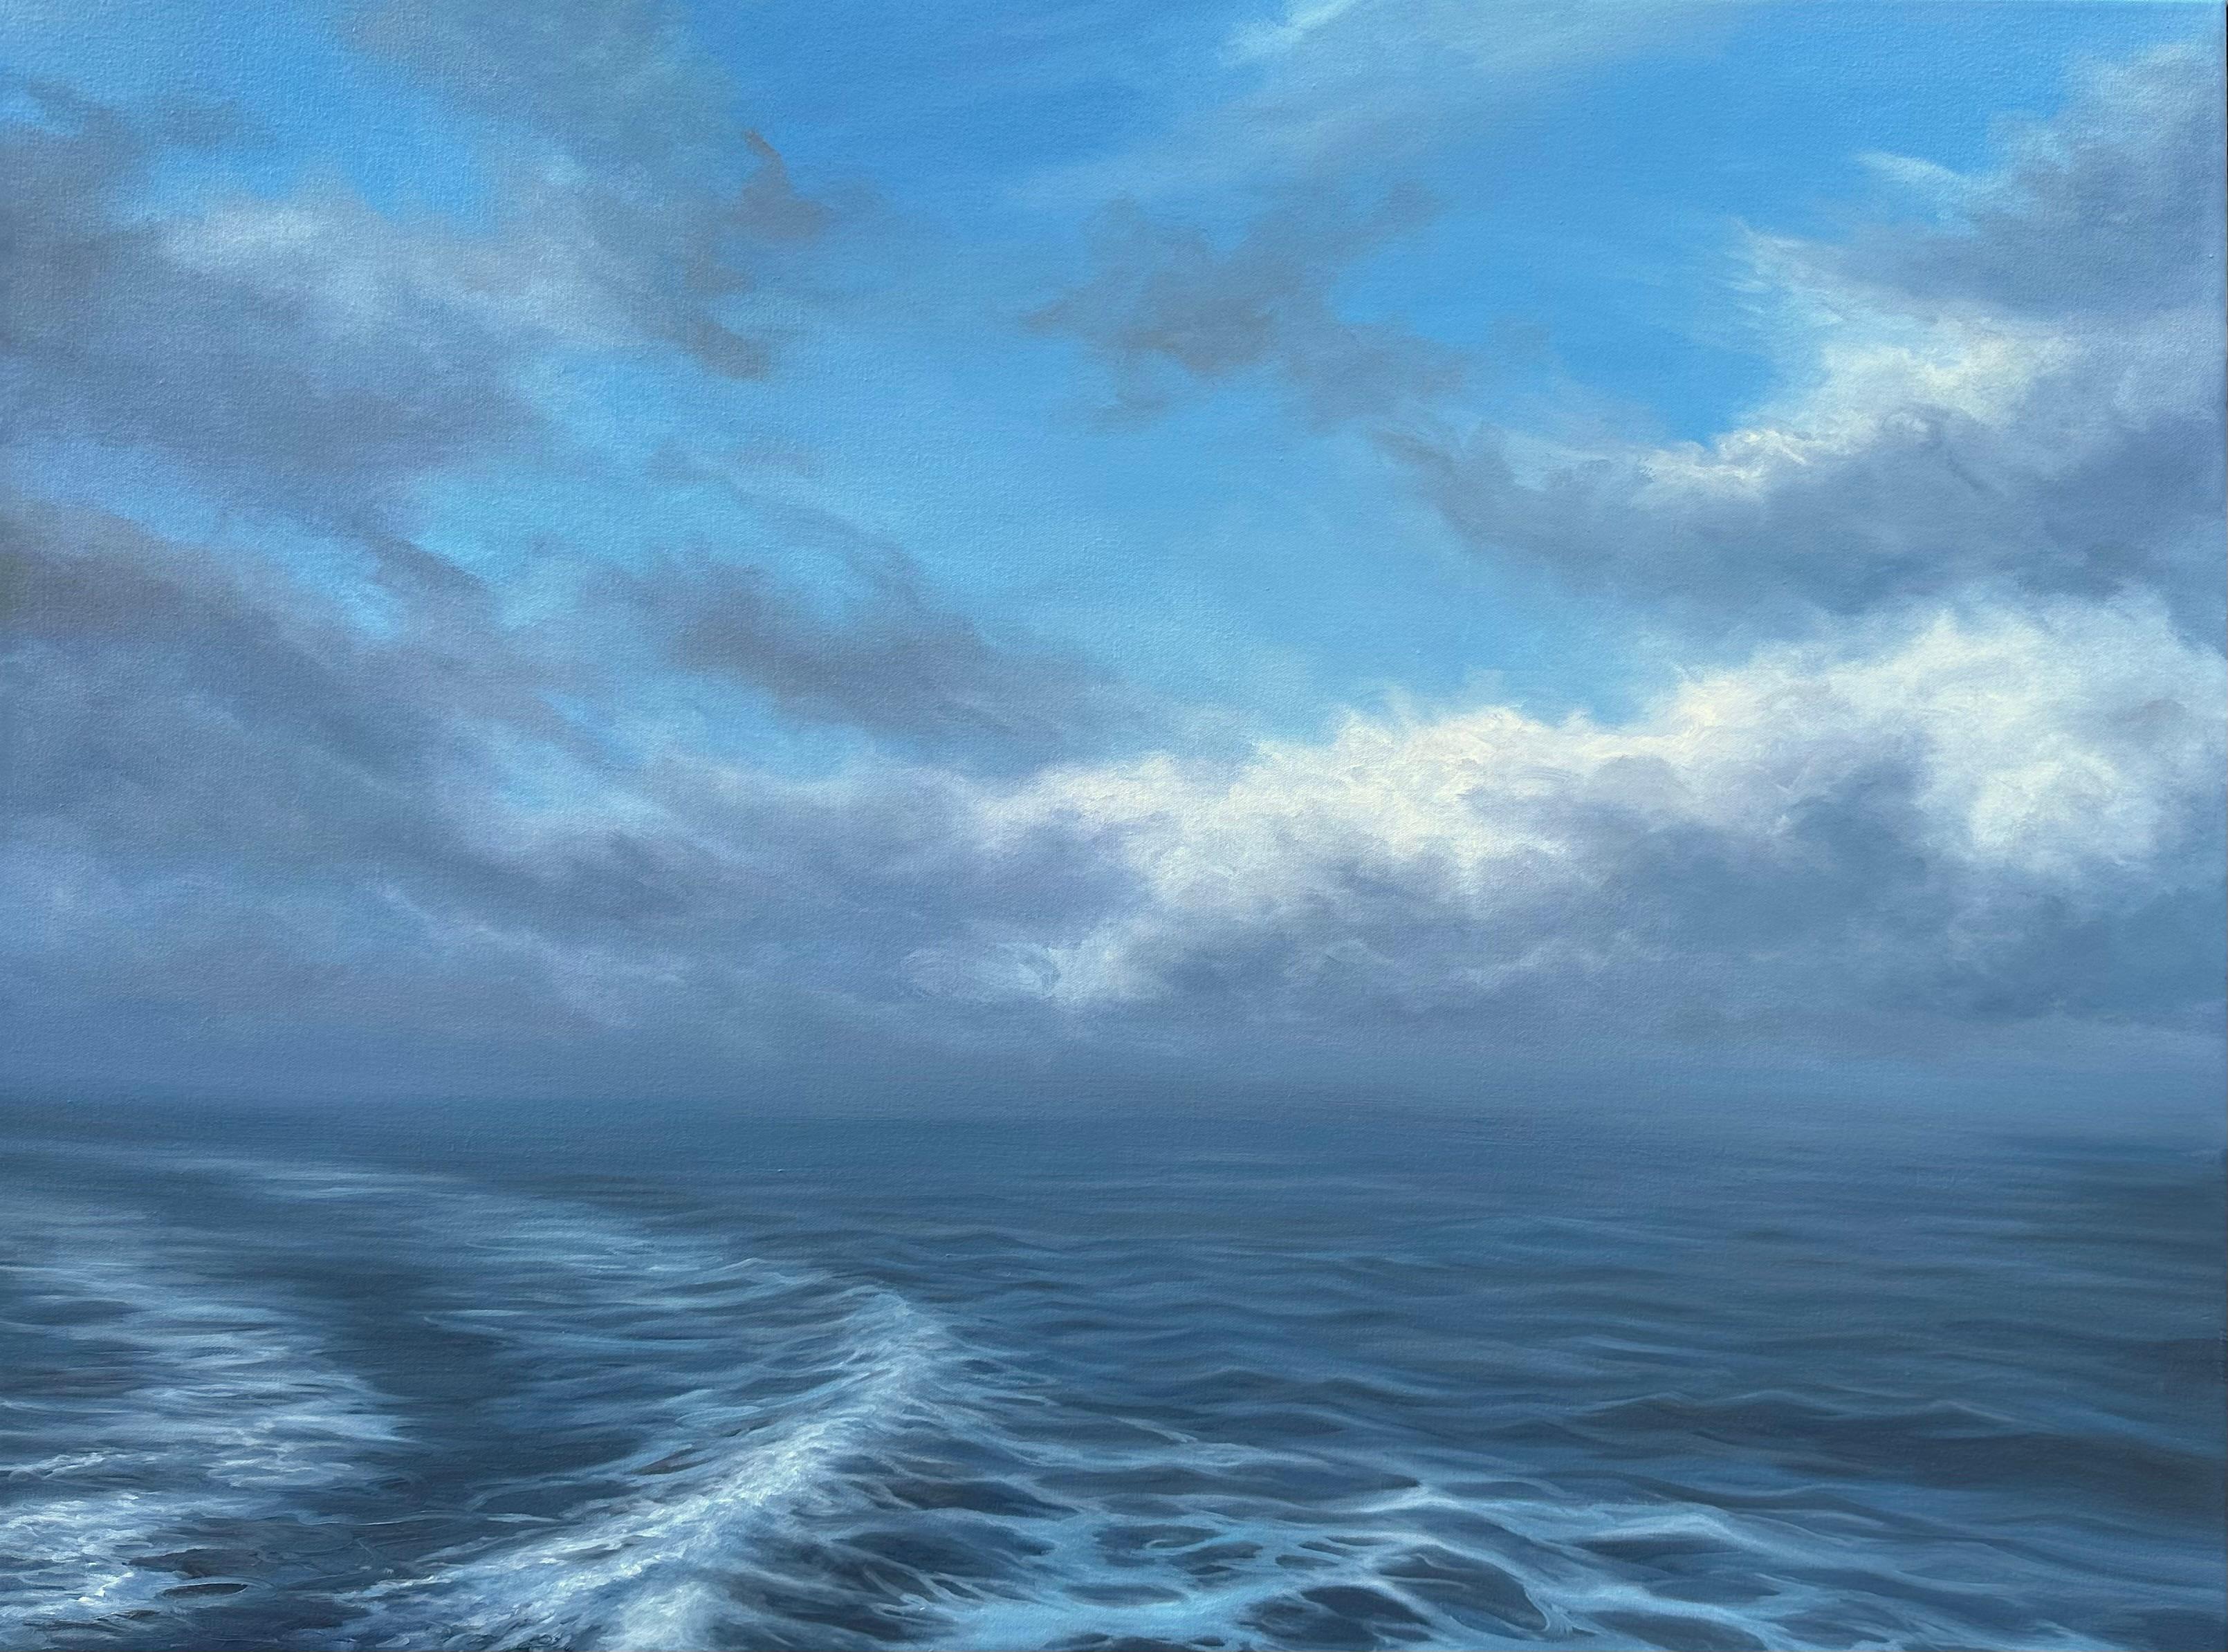 "Into the Mystic", a landscape oil painting featuring an ethereal sky and shore